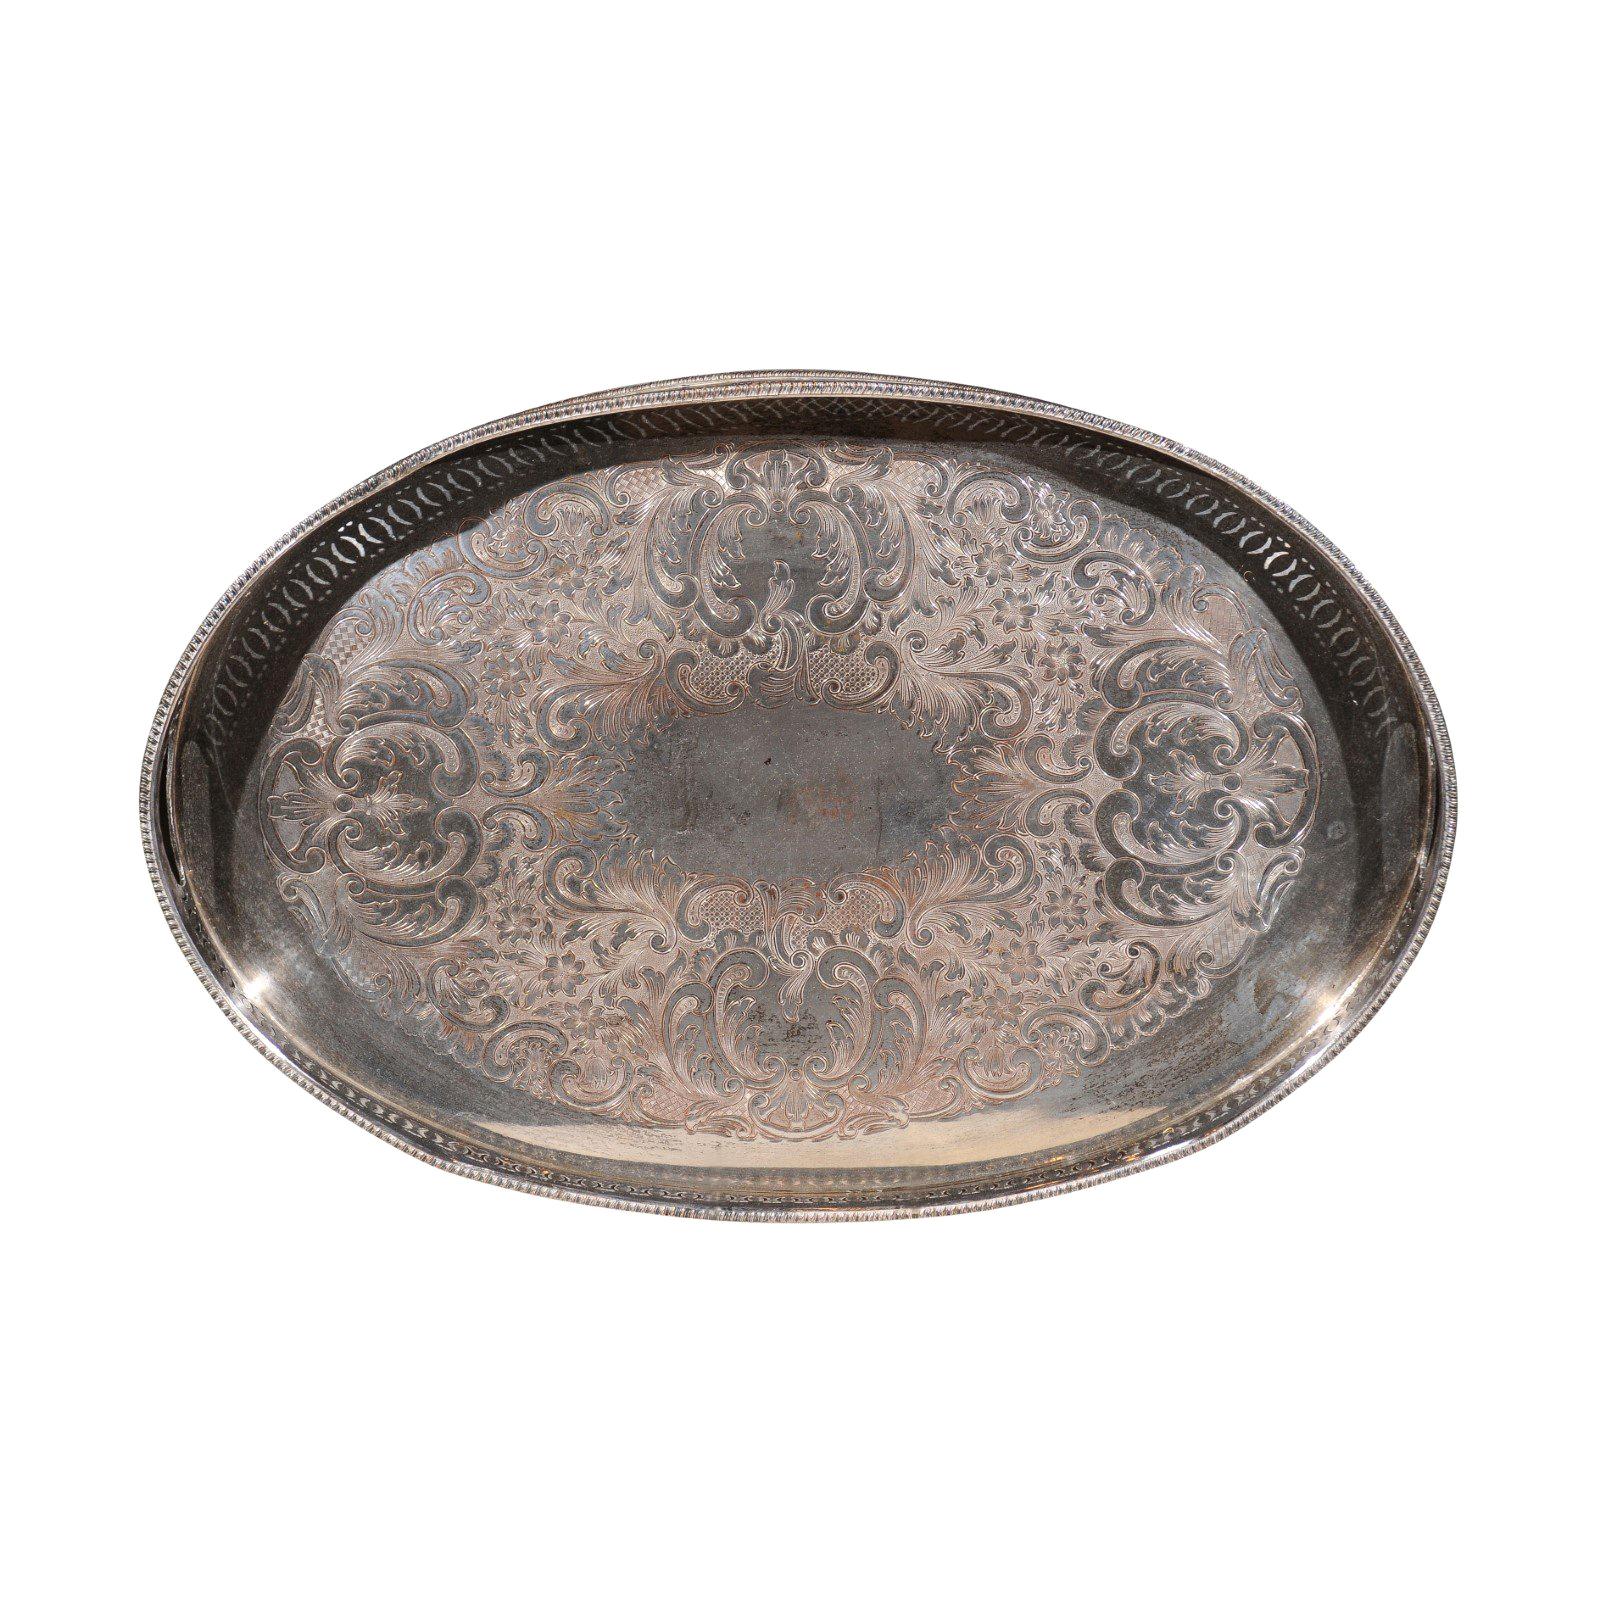 English Edwardian Period Silver Plated Tray with Pierced Motifs and C-Scrolls For Sale